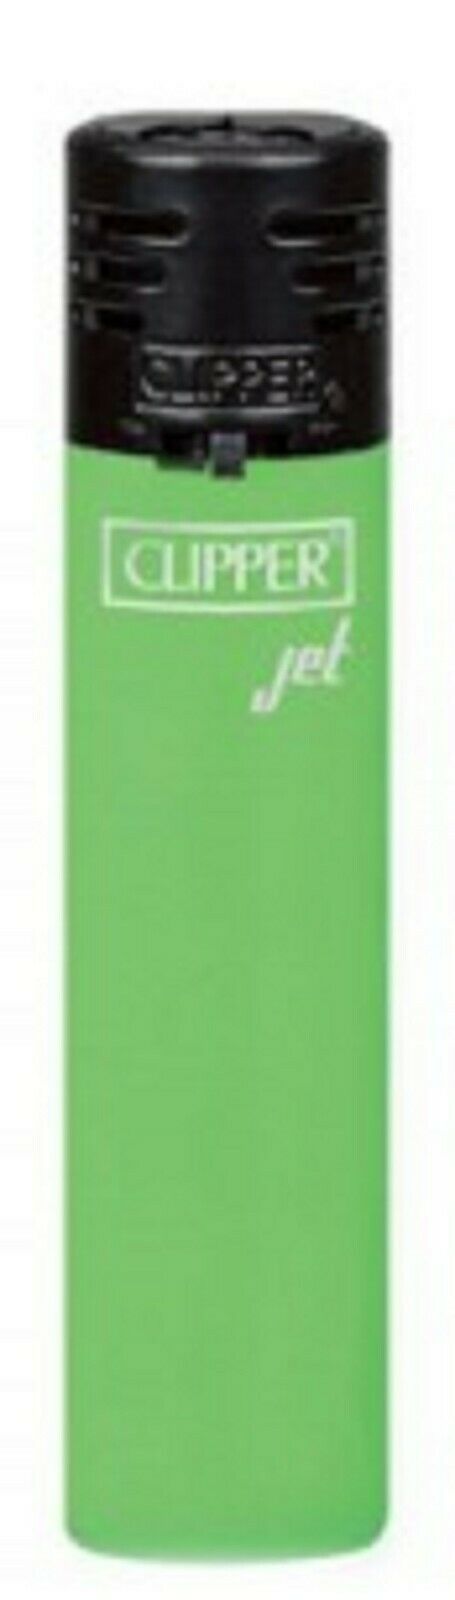 clipper lighter New Jet flame Green  genuine product